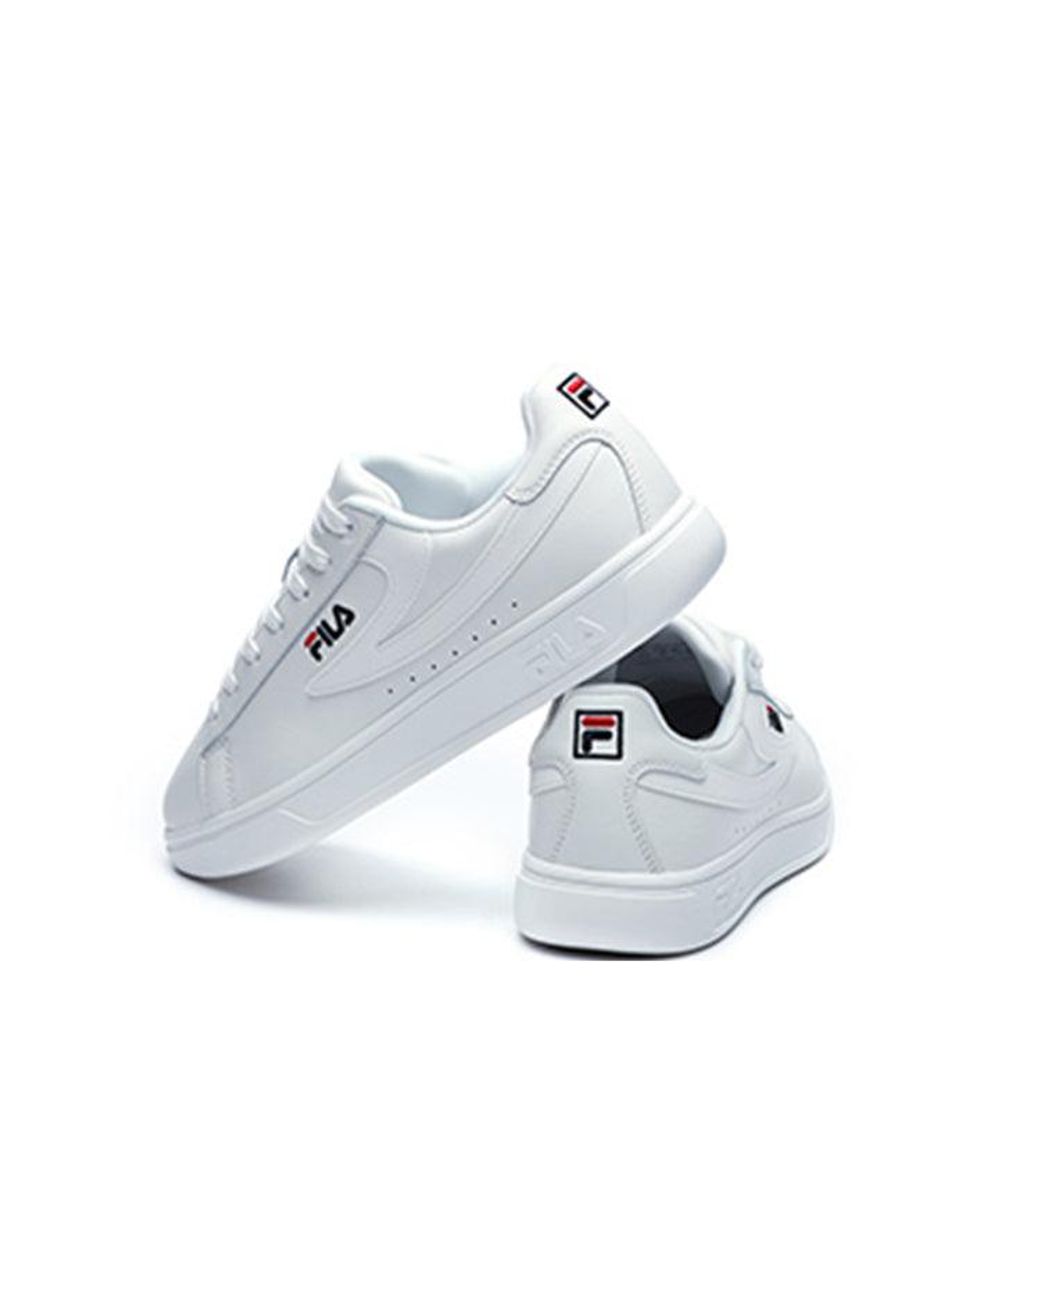 Fila Heritage- Fht Sneakers White | Lyst